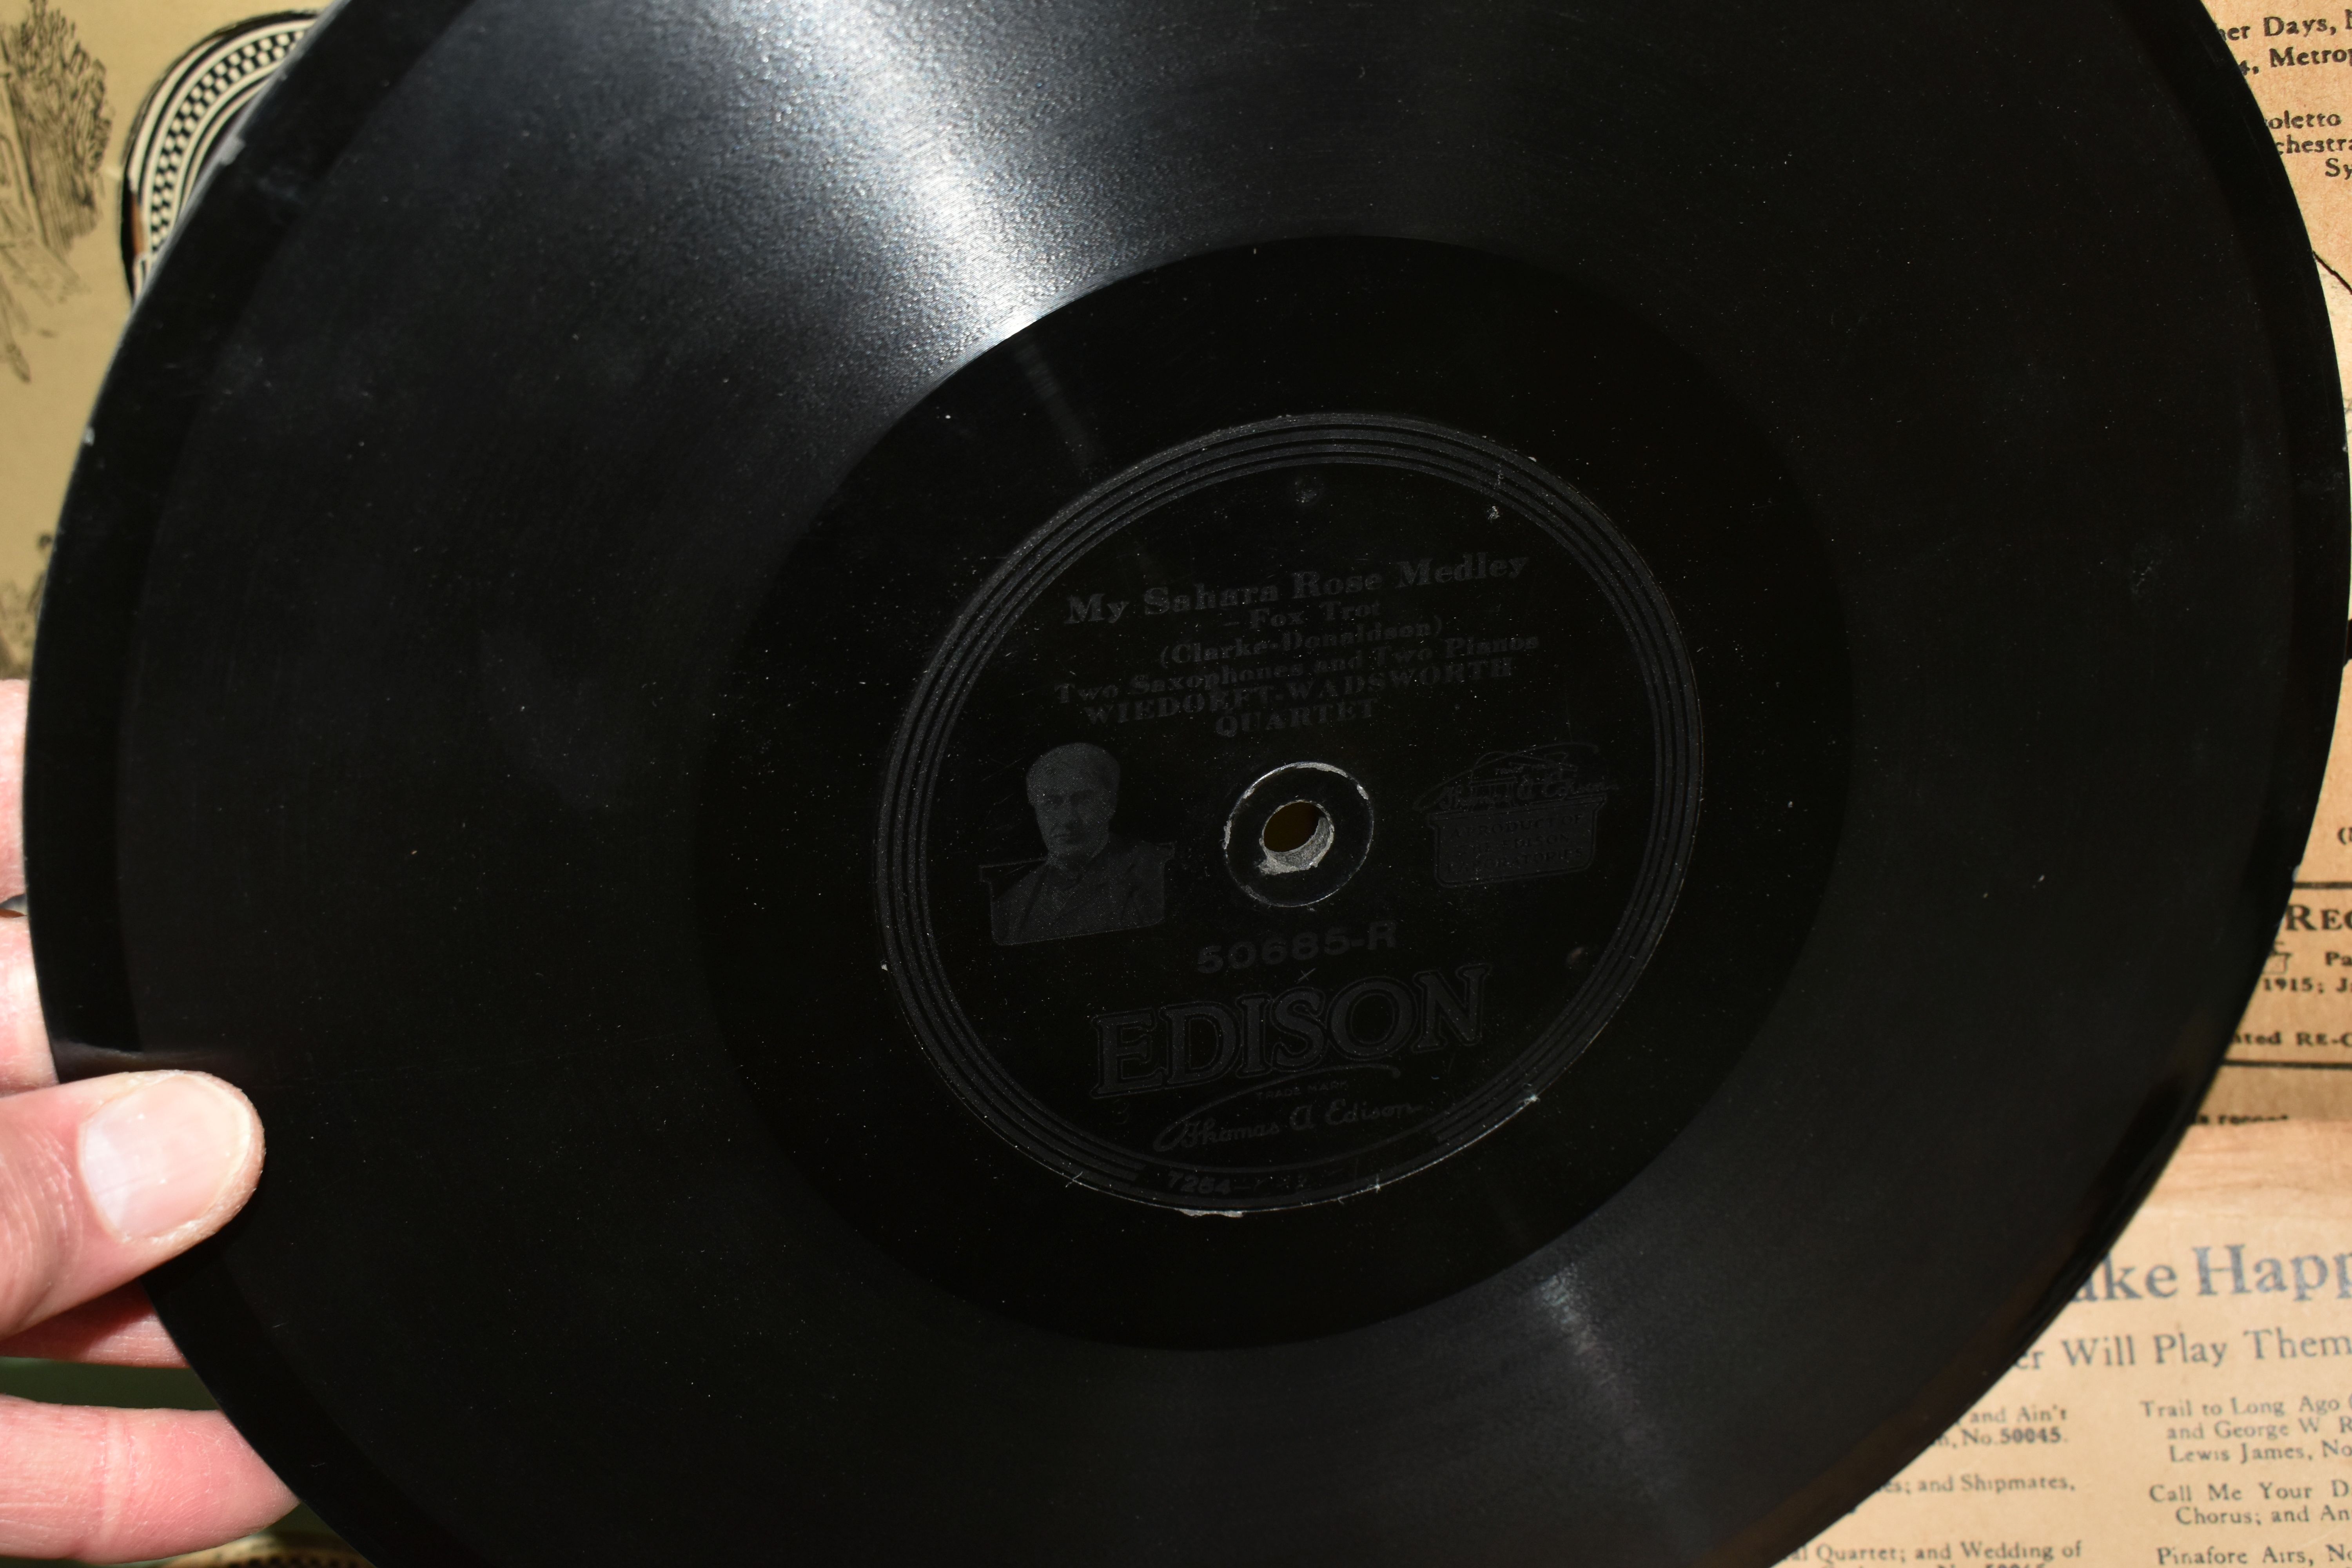 THREE BOXES OF EDISON DISC RECORDS, styles include jazz, ragtime, music hall etc - Image 6 of 6